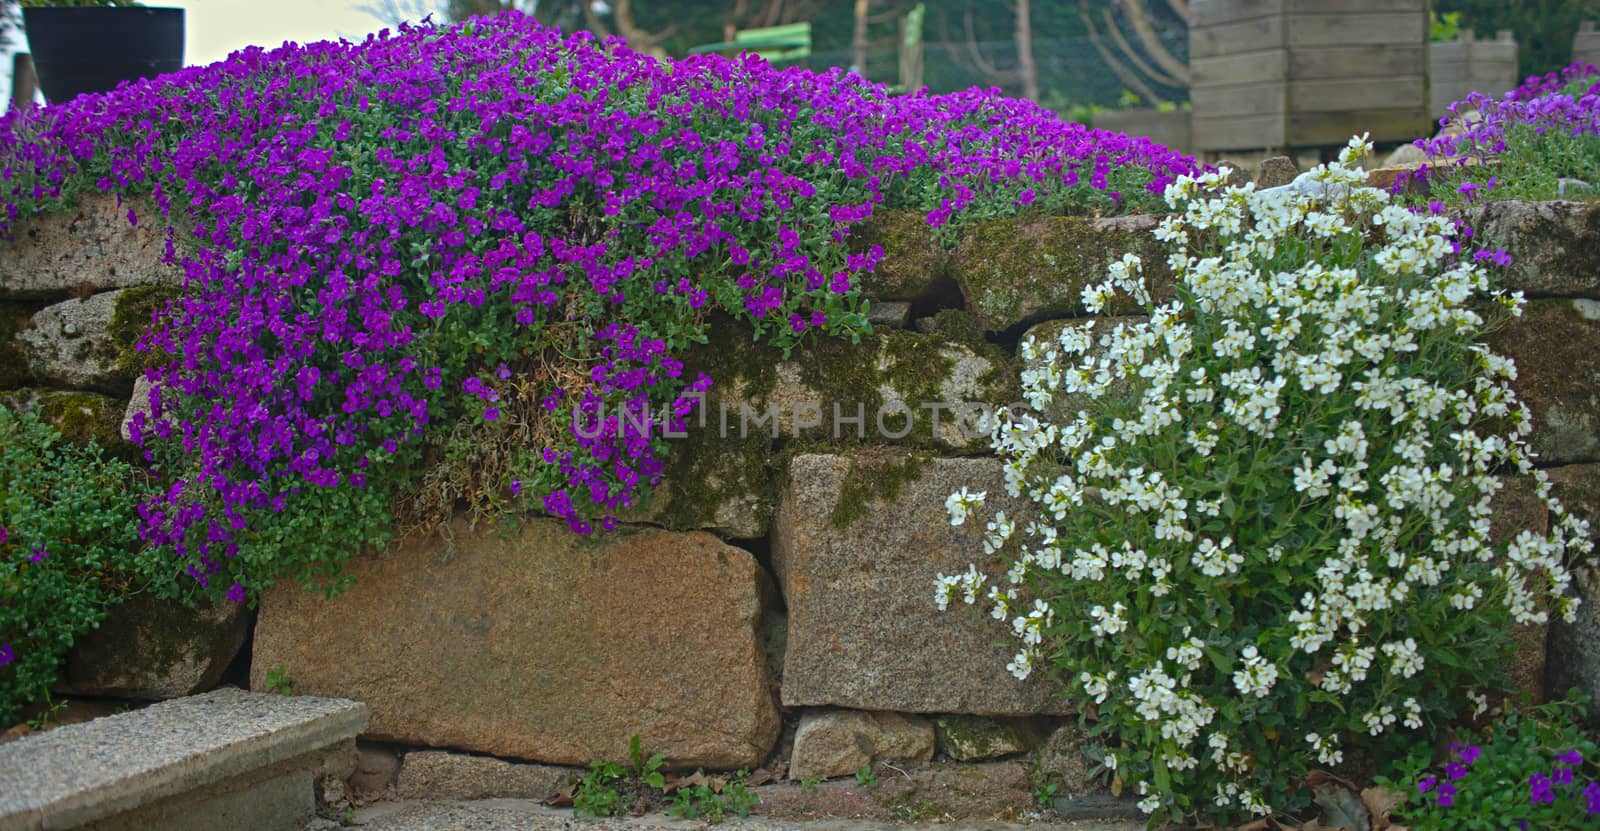 Plants blooming with small white and violet flowers on stone wall by sheriffkule